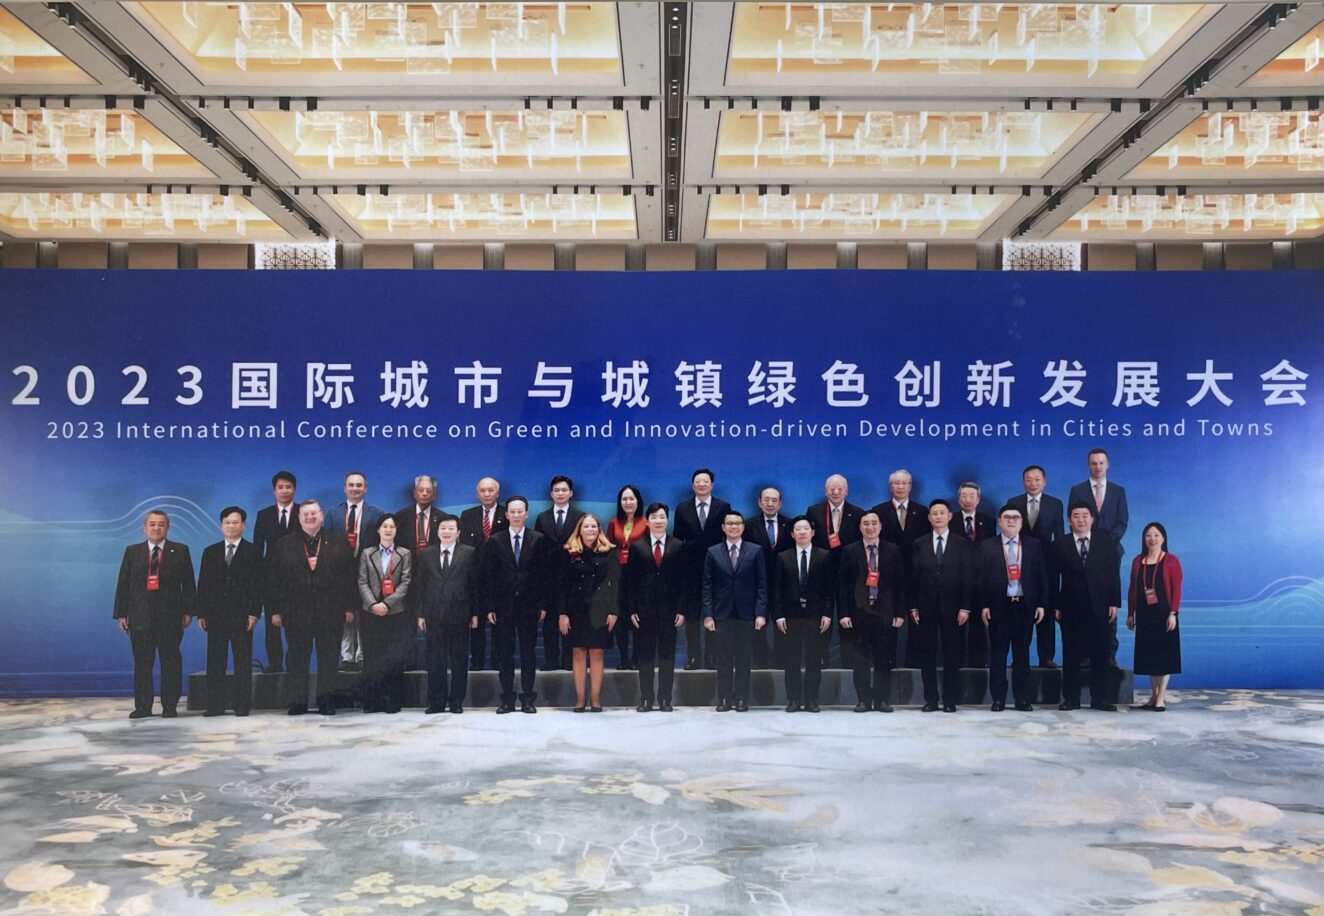 NZCFS President Chris Lipscombe and Northern Vice President Fan Miao with other VIPs at 2nd International Conference on Green and Innovation-driven Urban Development, Xiangcheng District, Suzhou.